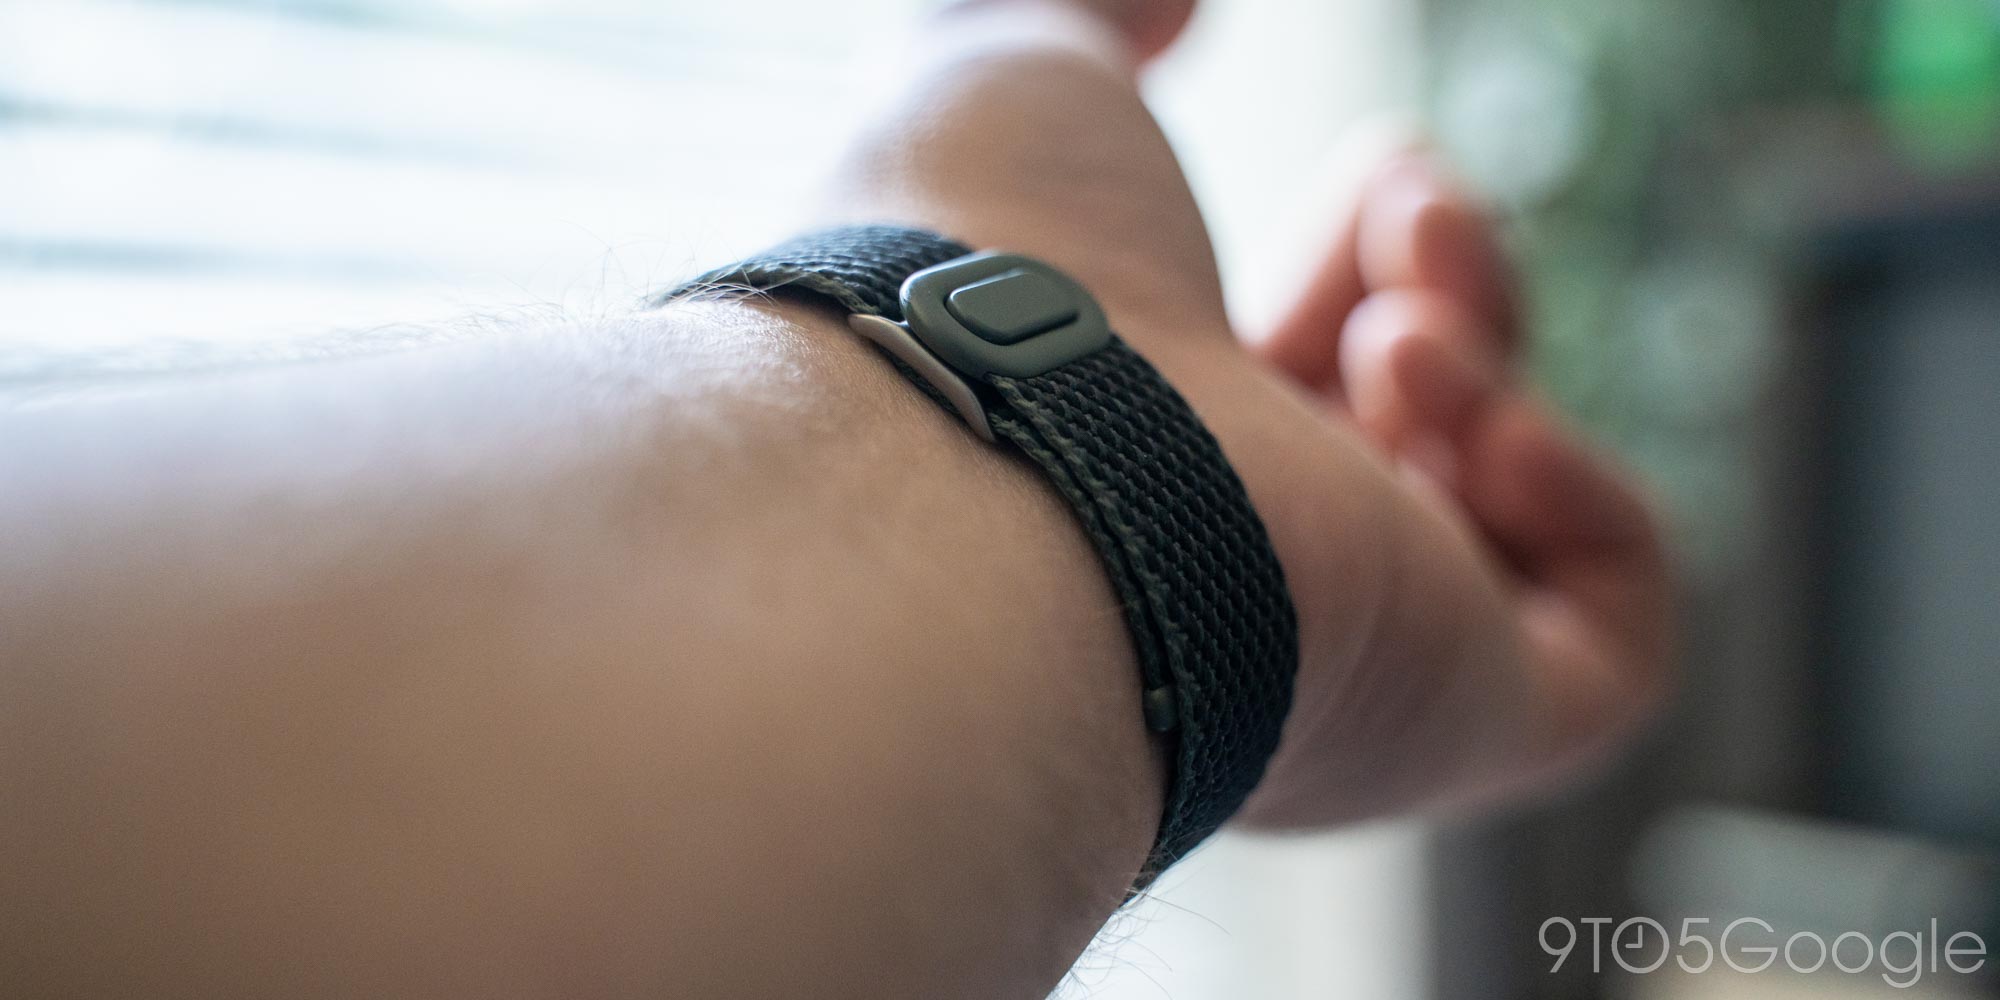 is Review: band Watch Pixel but comfortable, costly Woven